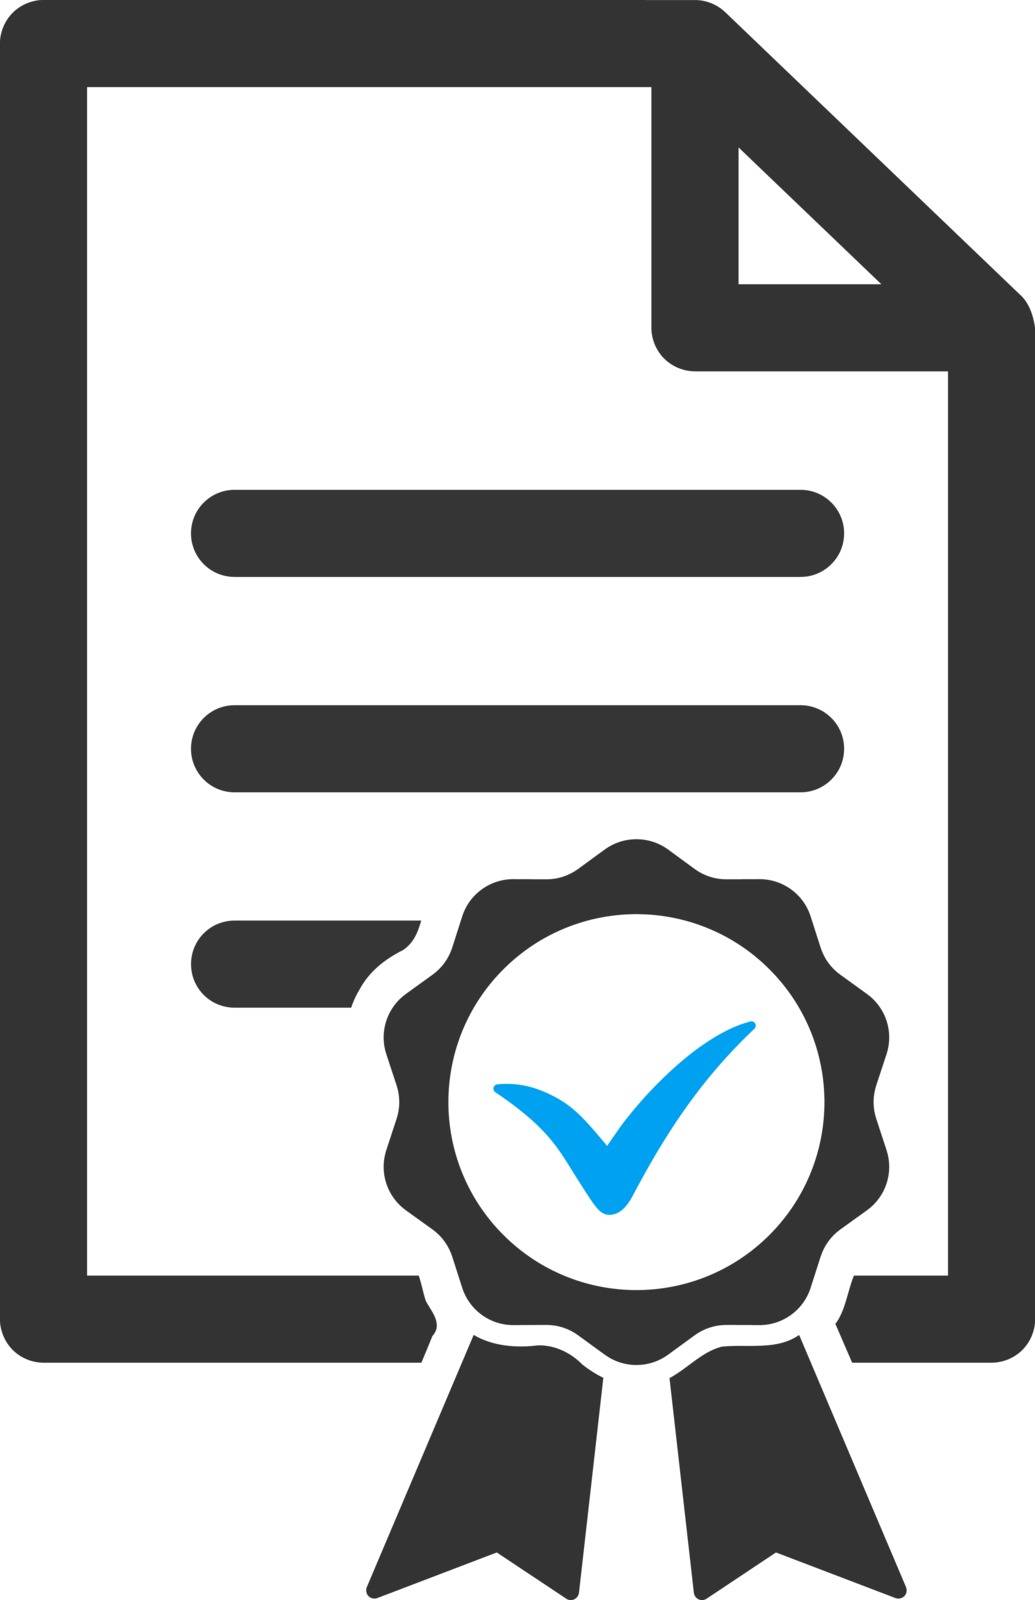 Certified vector icon. Style is bicolor flat symbol, blue and gray colors, rounded angles, white background.